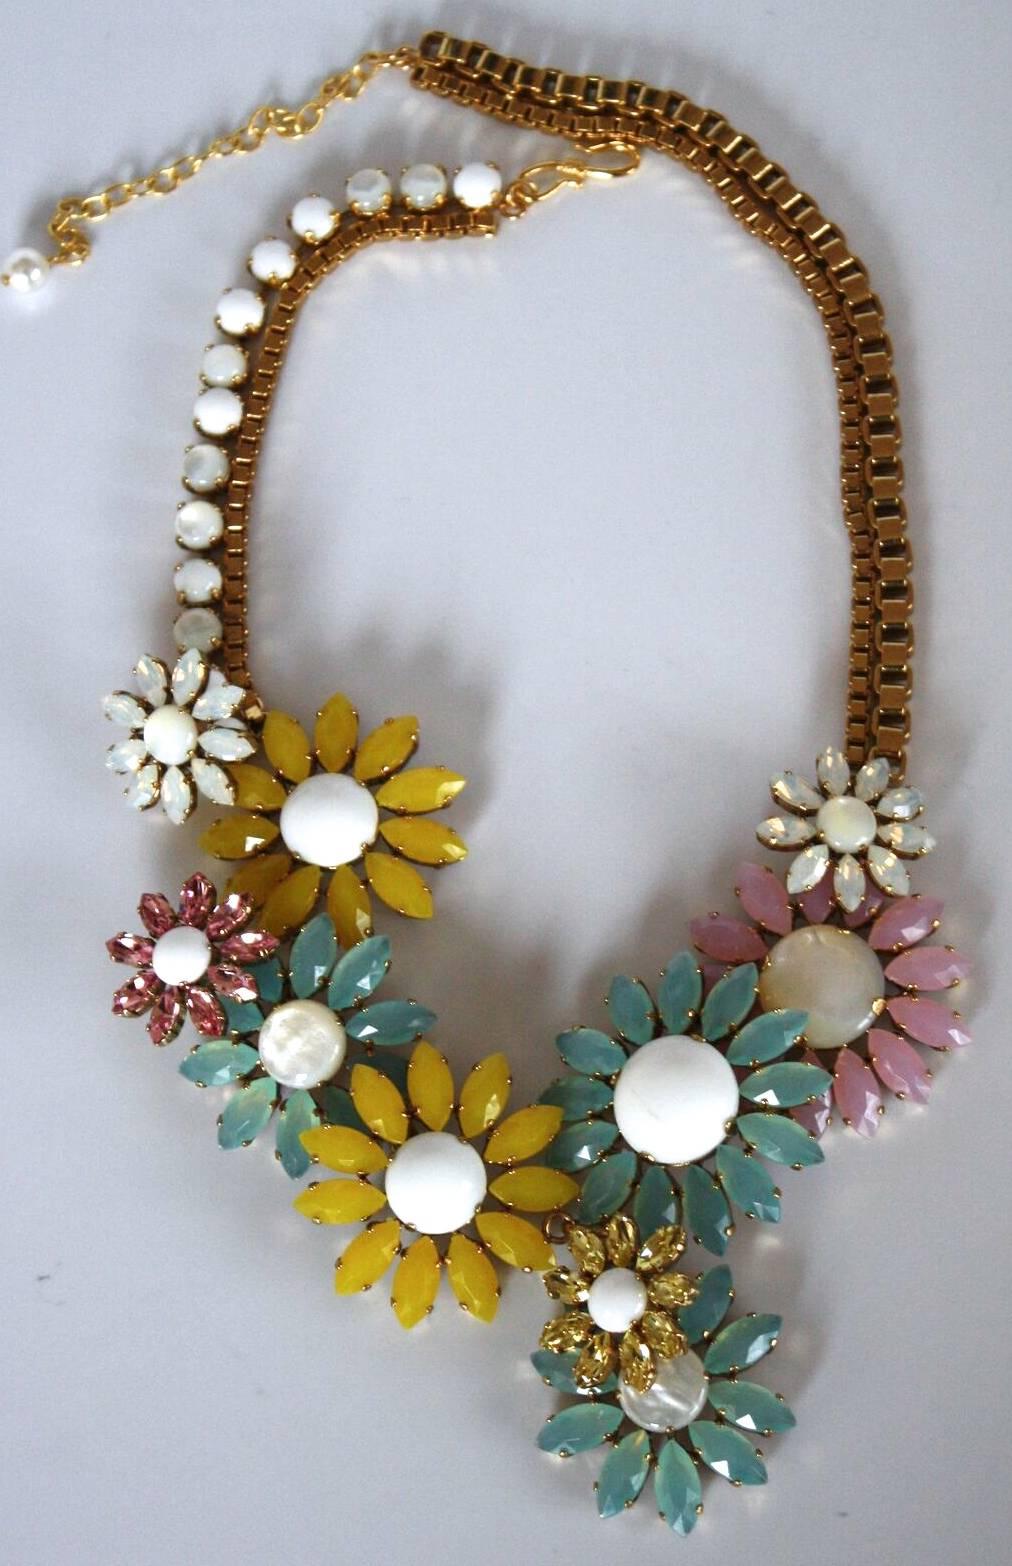 Pastel handmade glass cabochon and Swarovski Crystal daisy necklace from Philippe Ferrandis.   

18" width with 4" extension 